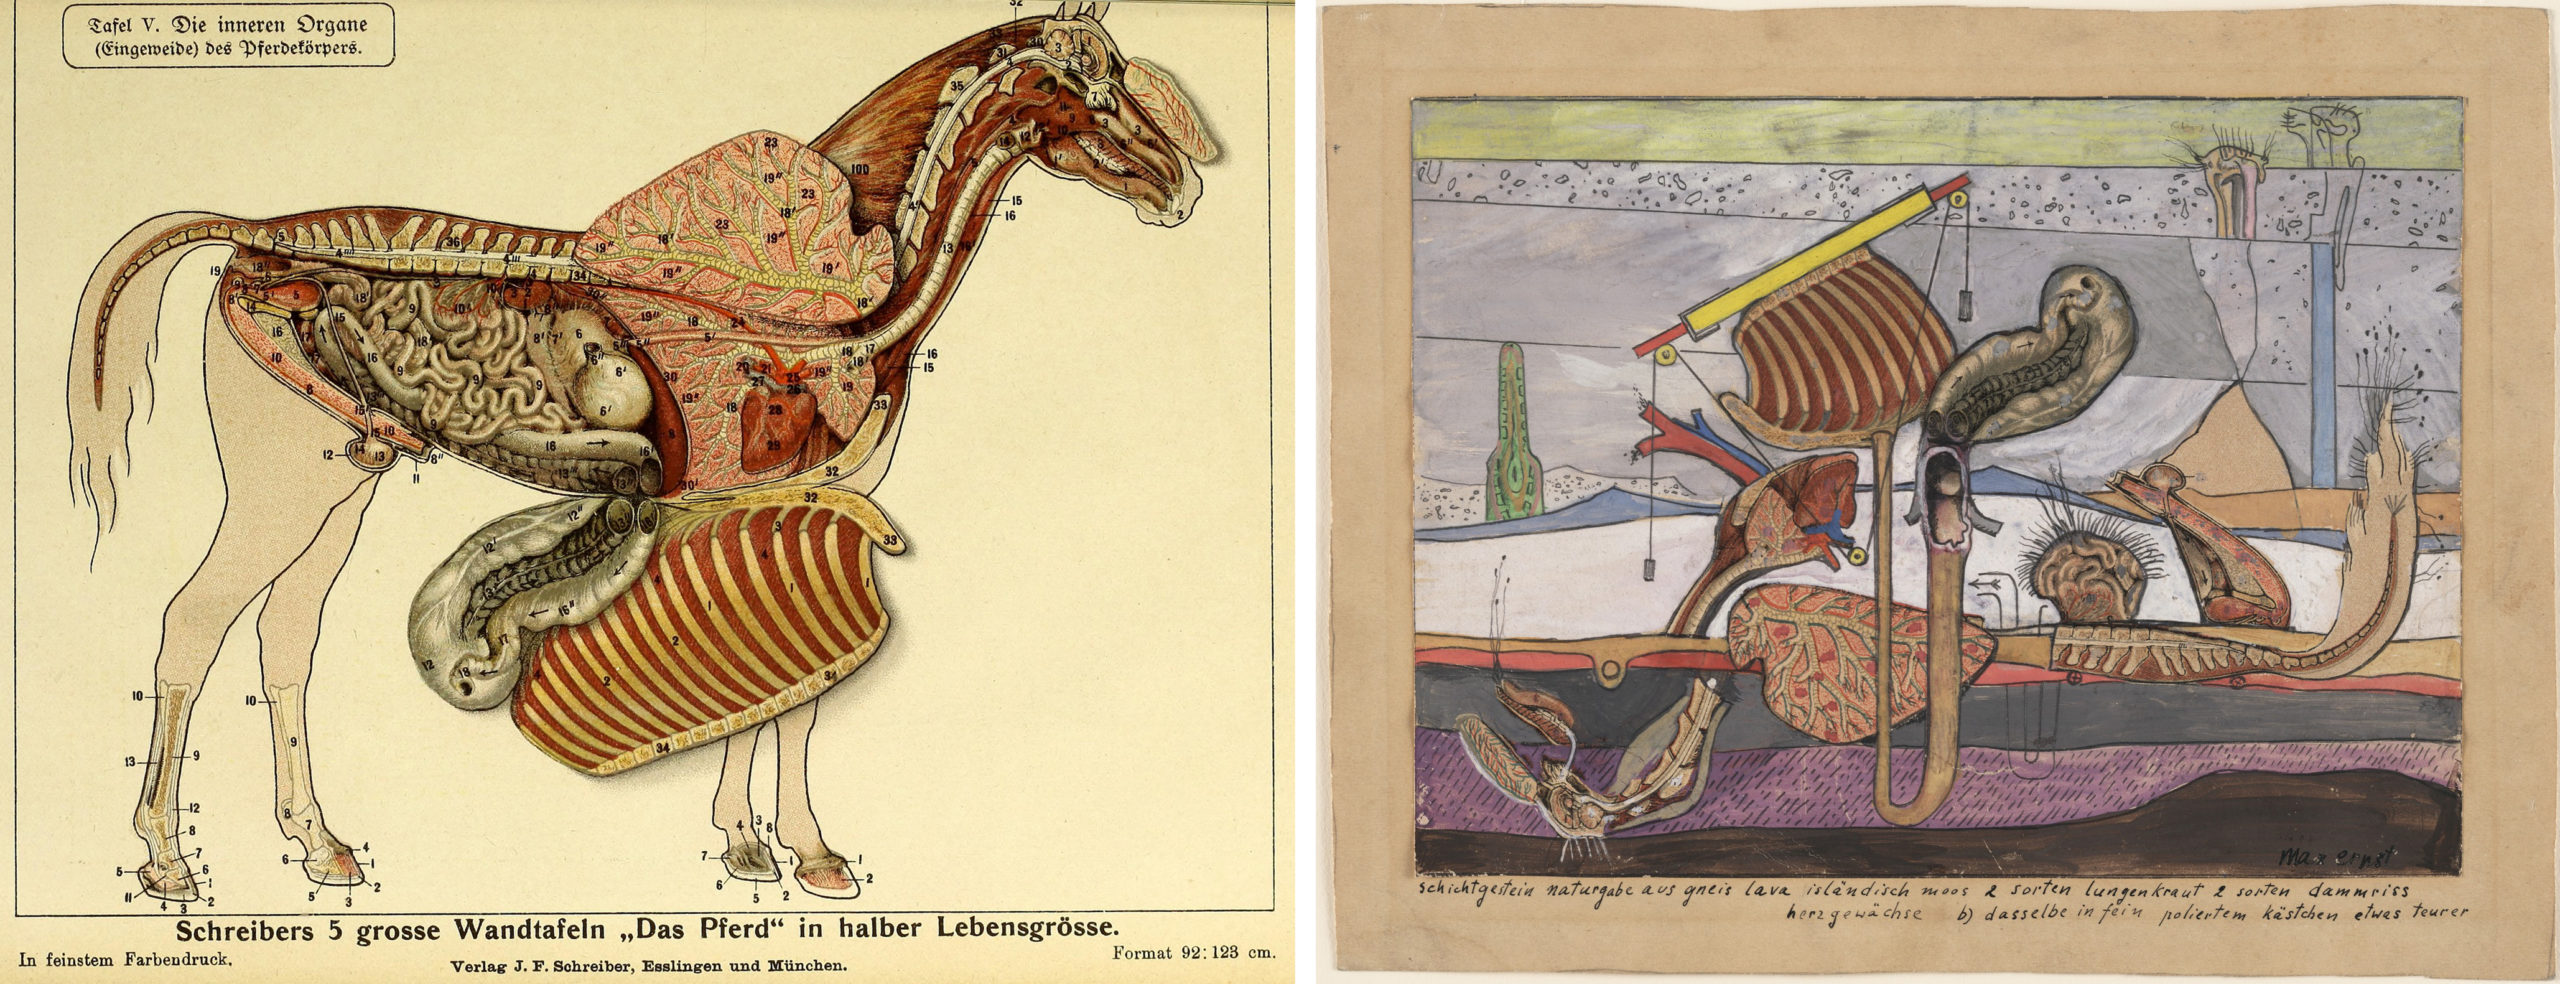 Left: Illustration of the inner organs of a horse, from Bibliotheca Paedagogica (Cologne: Ständige Lehrmittel-Ausstellung, 1914); Right: Max Ernst, Stratified Rocks ..., 1920, gouache and pencil on printed paper on card stock, 19.1 x 24.1 cm (MoMA)